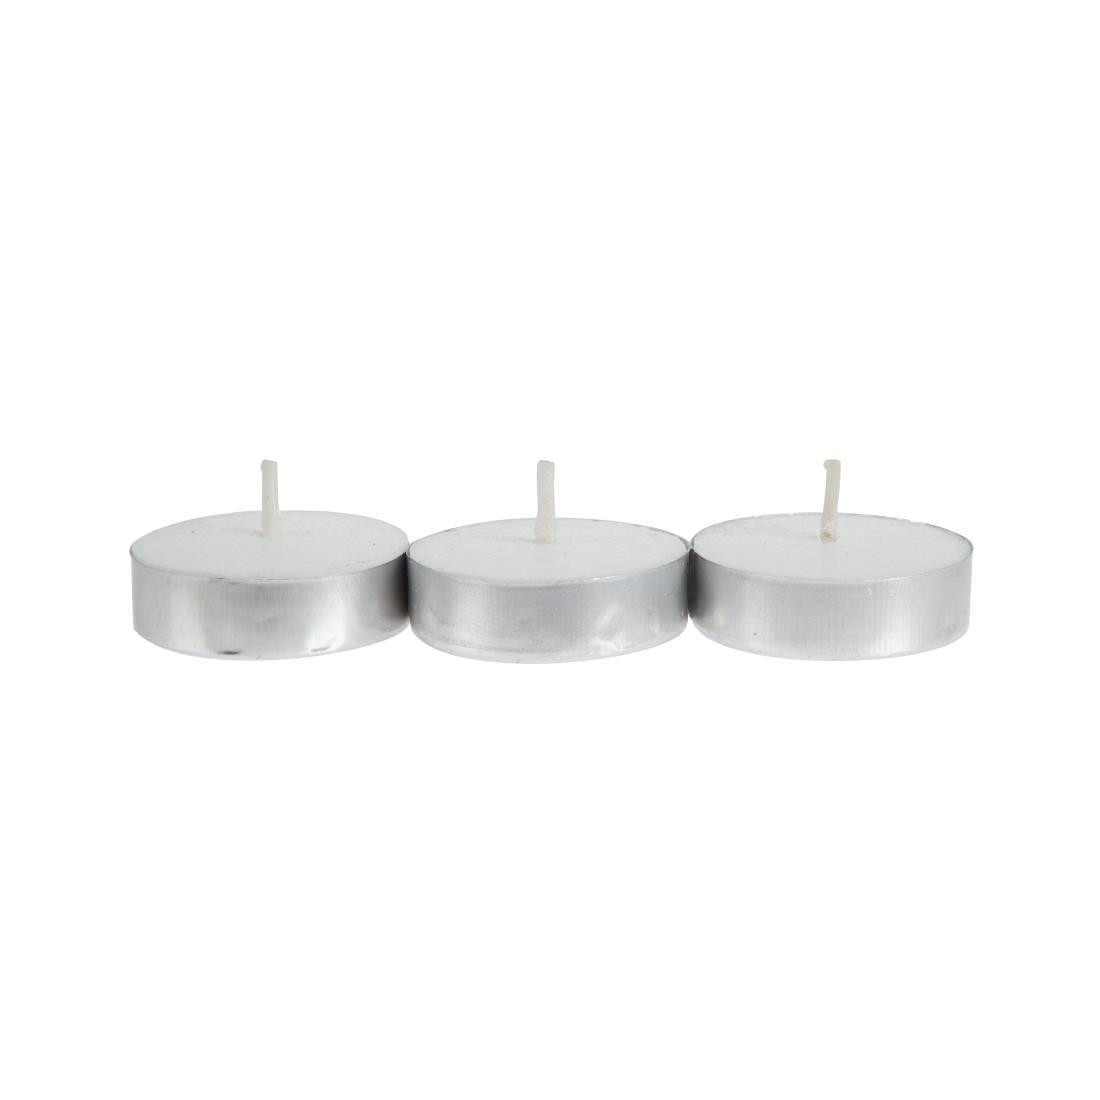 Olympia 4 Hour Tealights (Pack of 100) - GF448  - 3